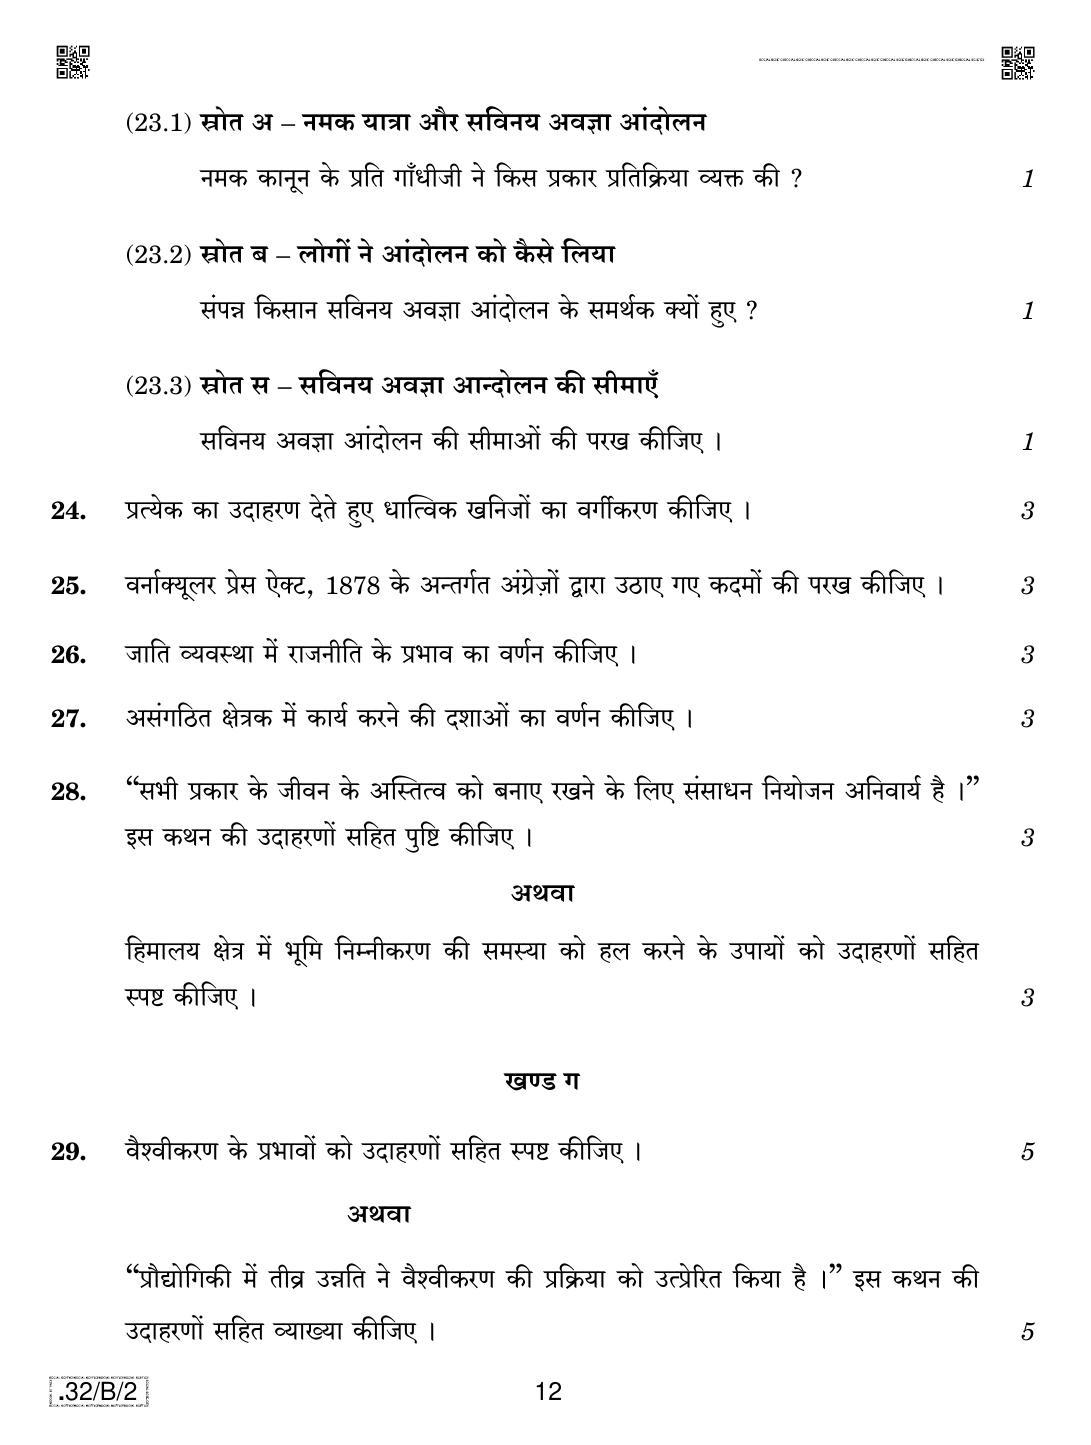 CBSE Class 10 32-C-2 Social Science 2020 Compartment Question Paper - Page 12